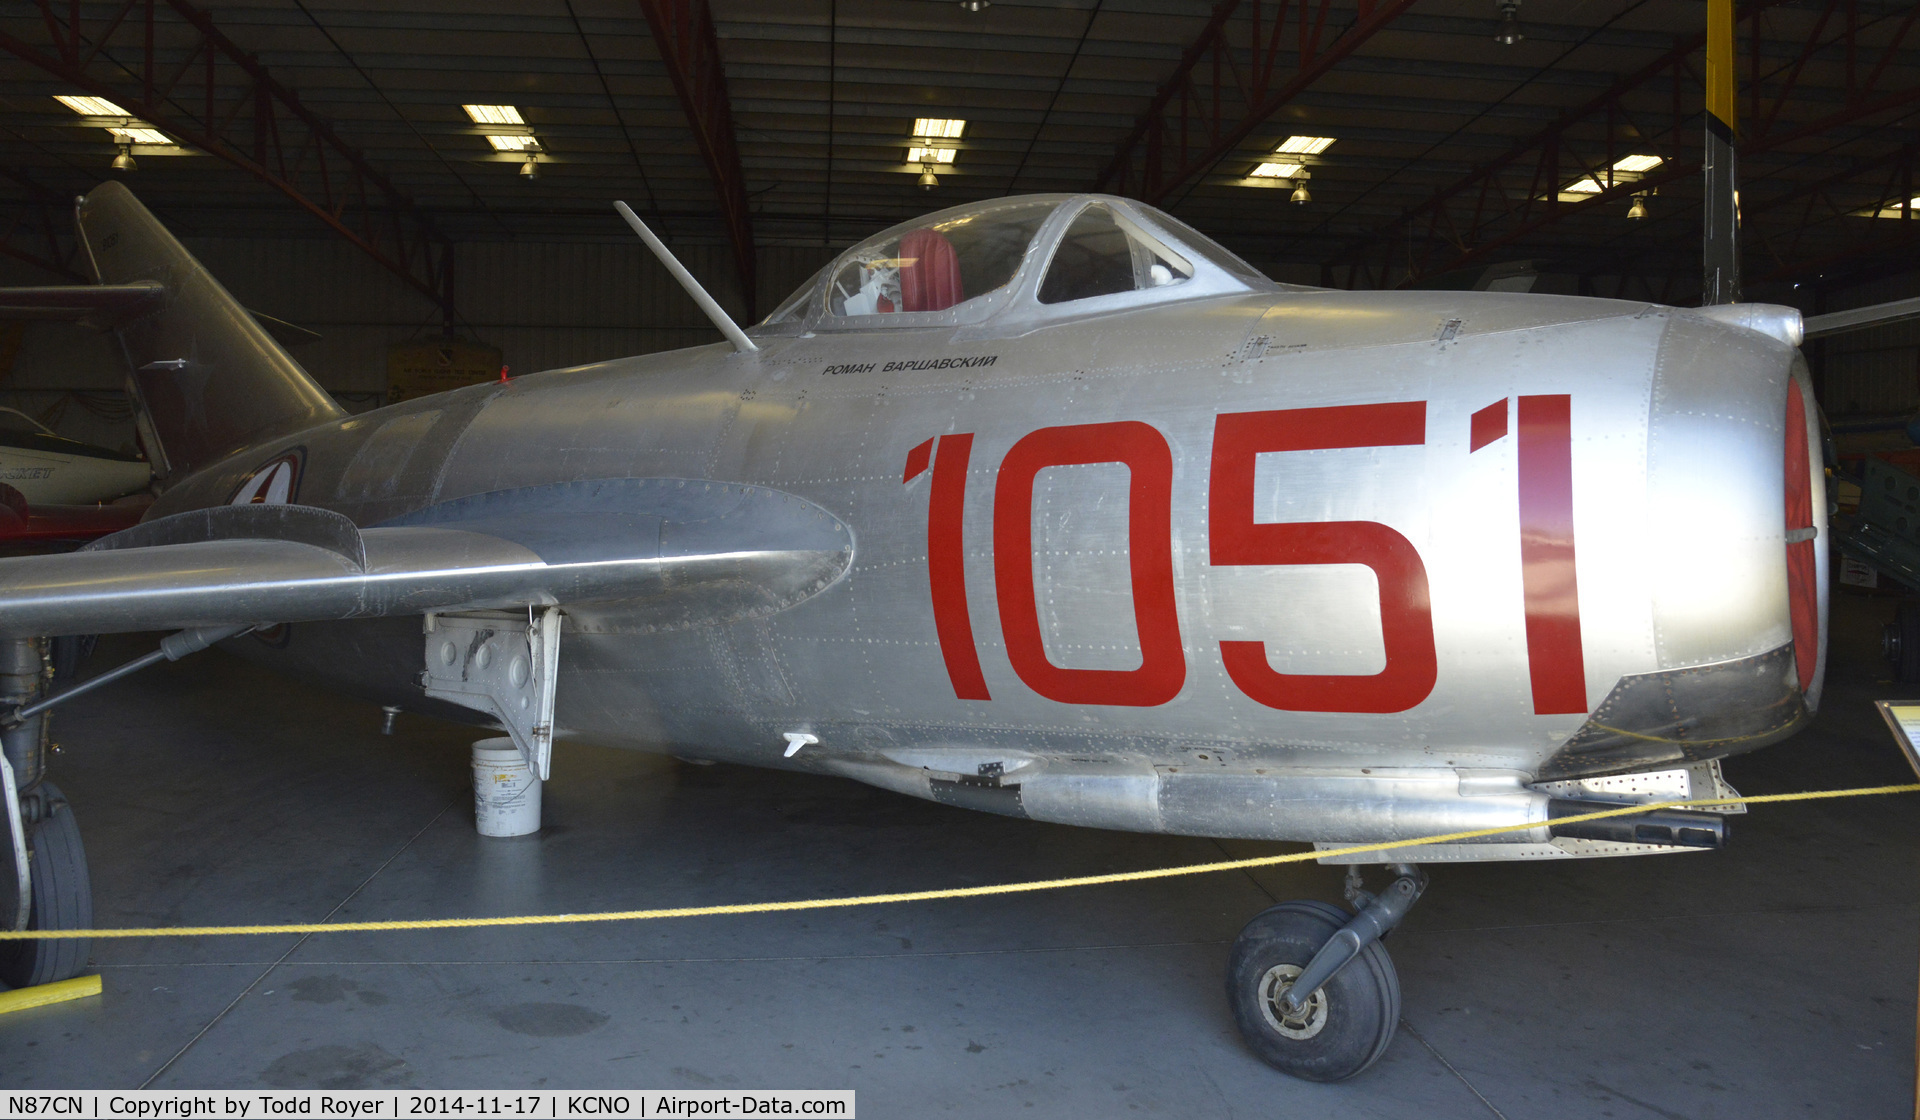 N87CN, Mikoyan-Gurevich MiG-15 C/N 910-51, At the Planes of Fame Museum Chino